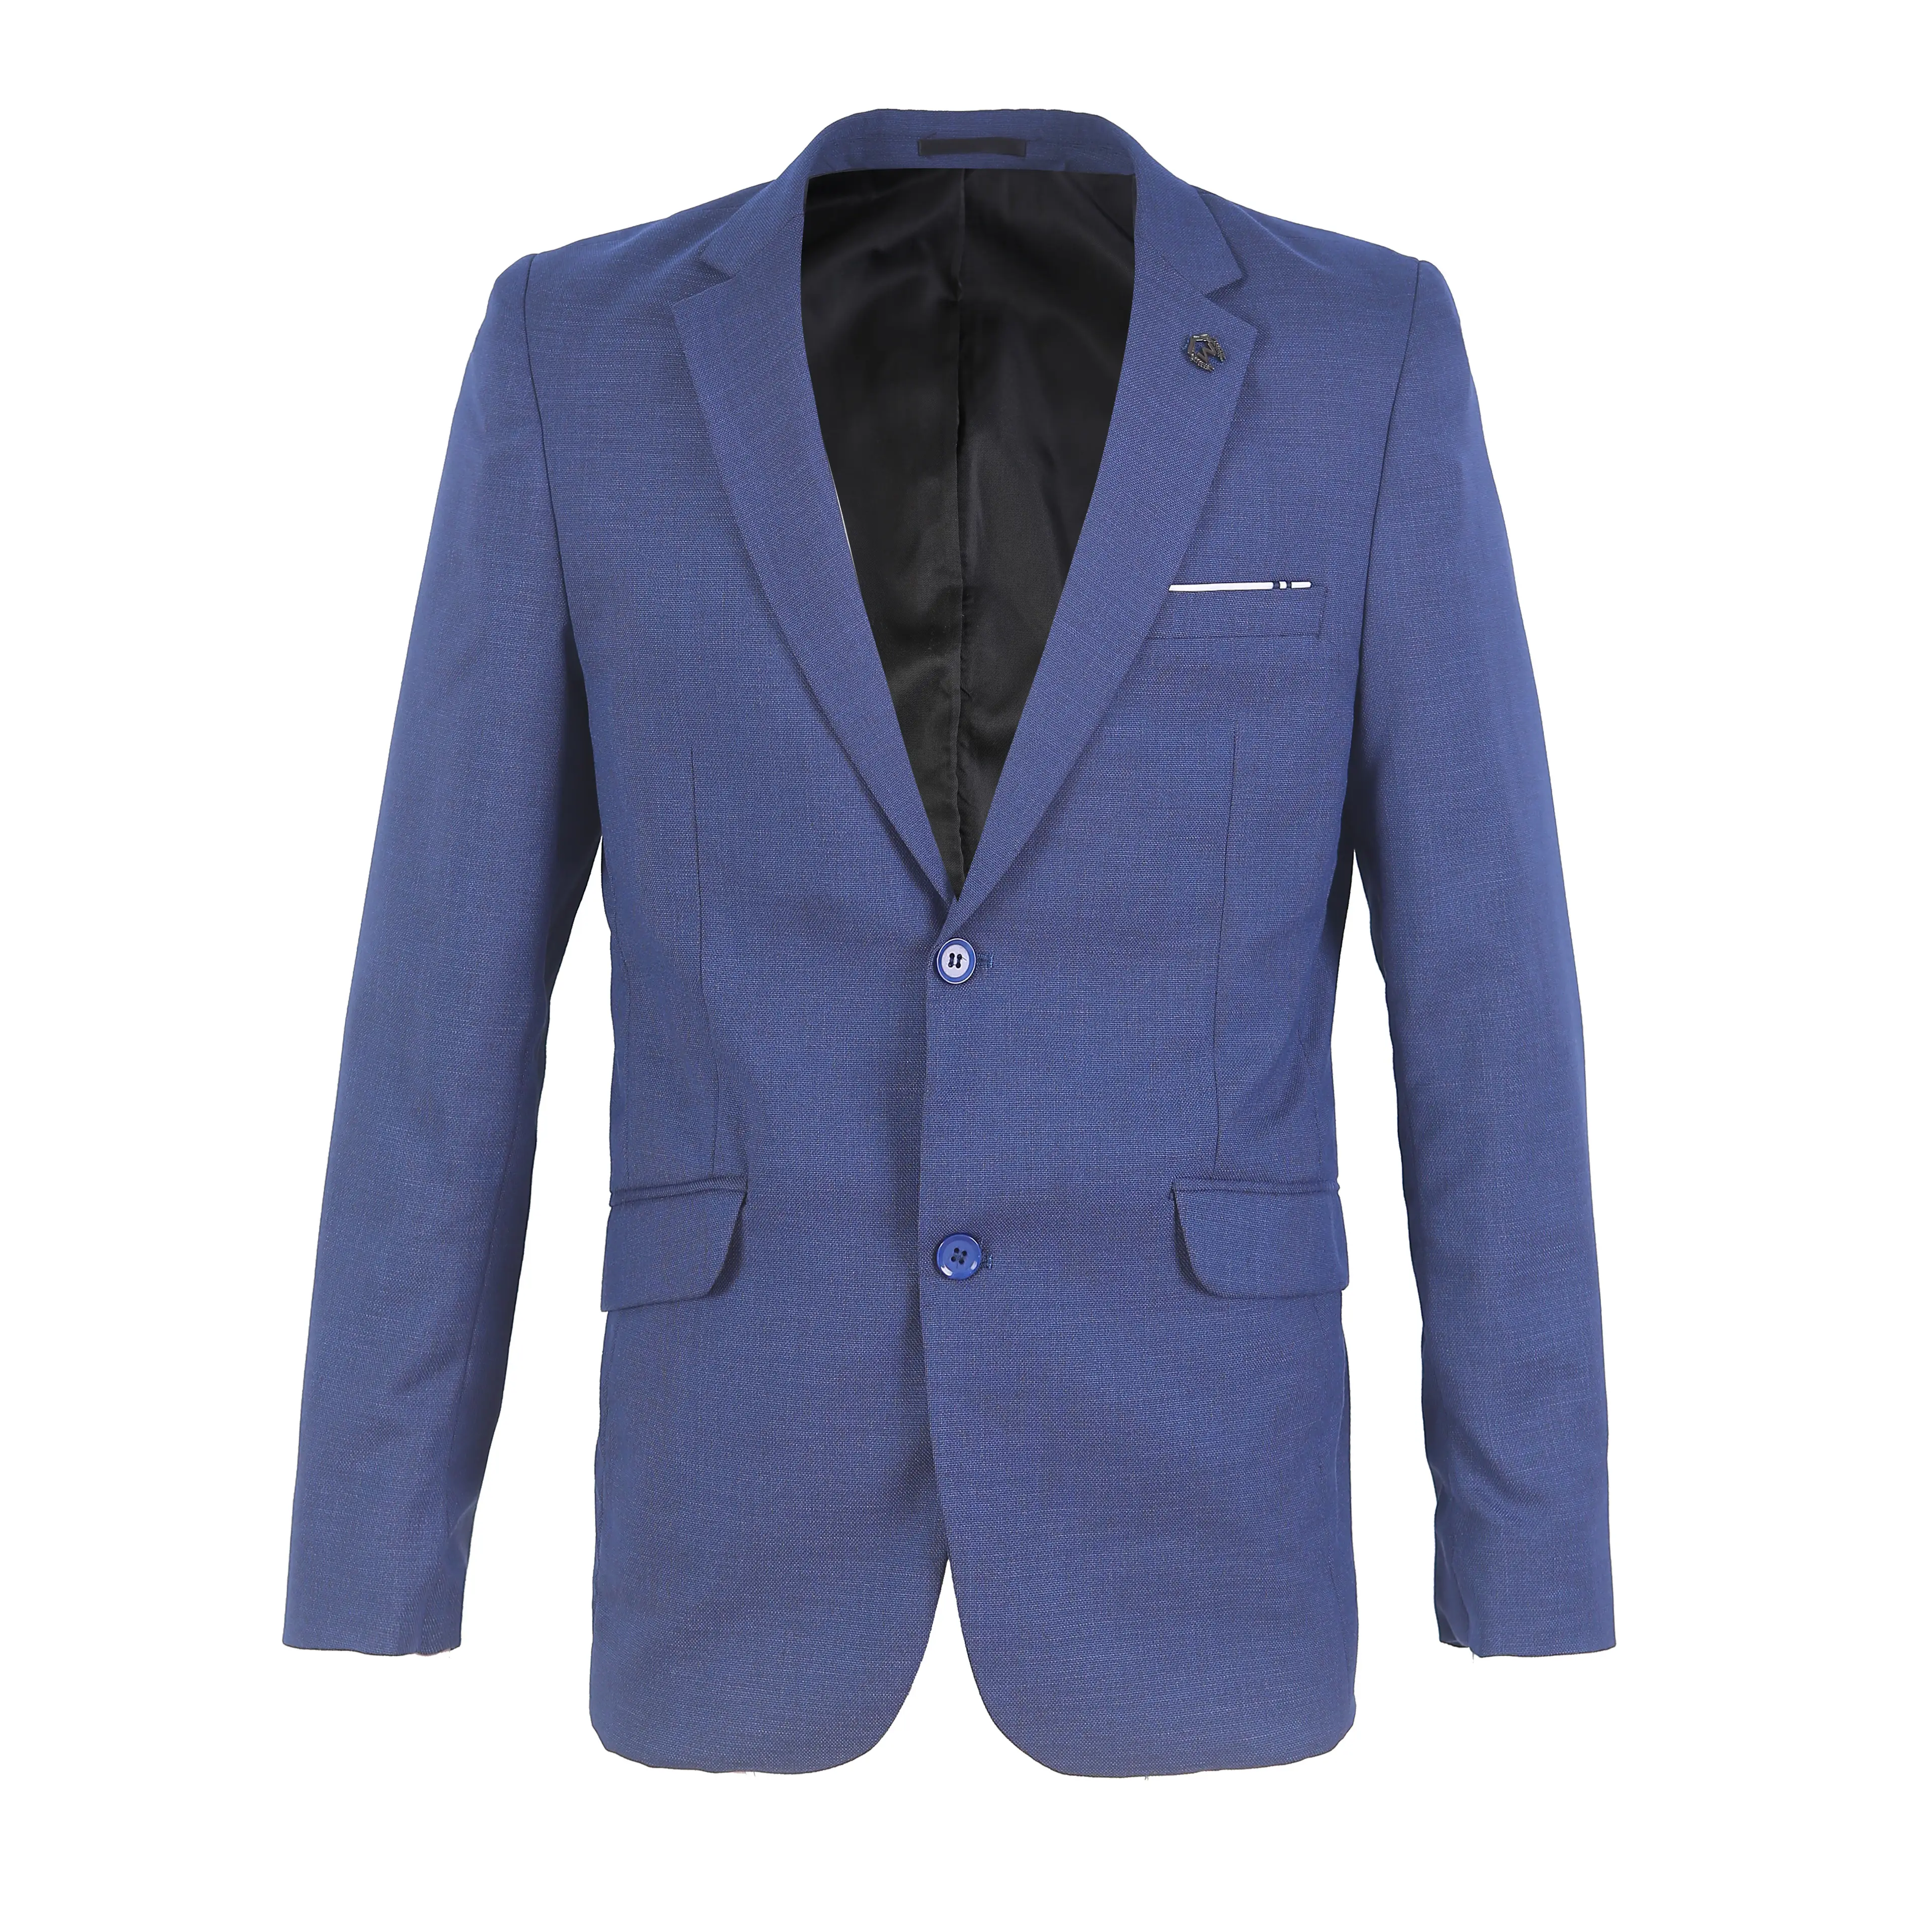 Fashion style polyester cotton fabric causal men's stylish blazer linen blazers for men with elbow patches